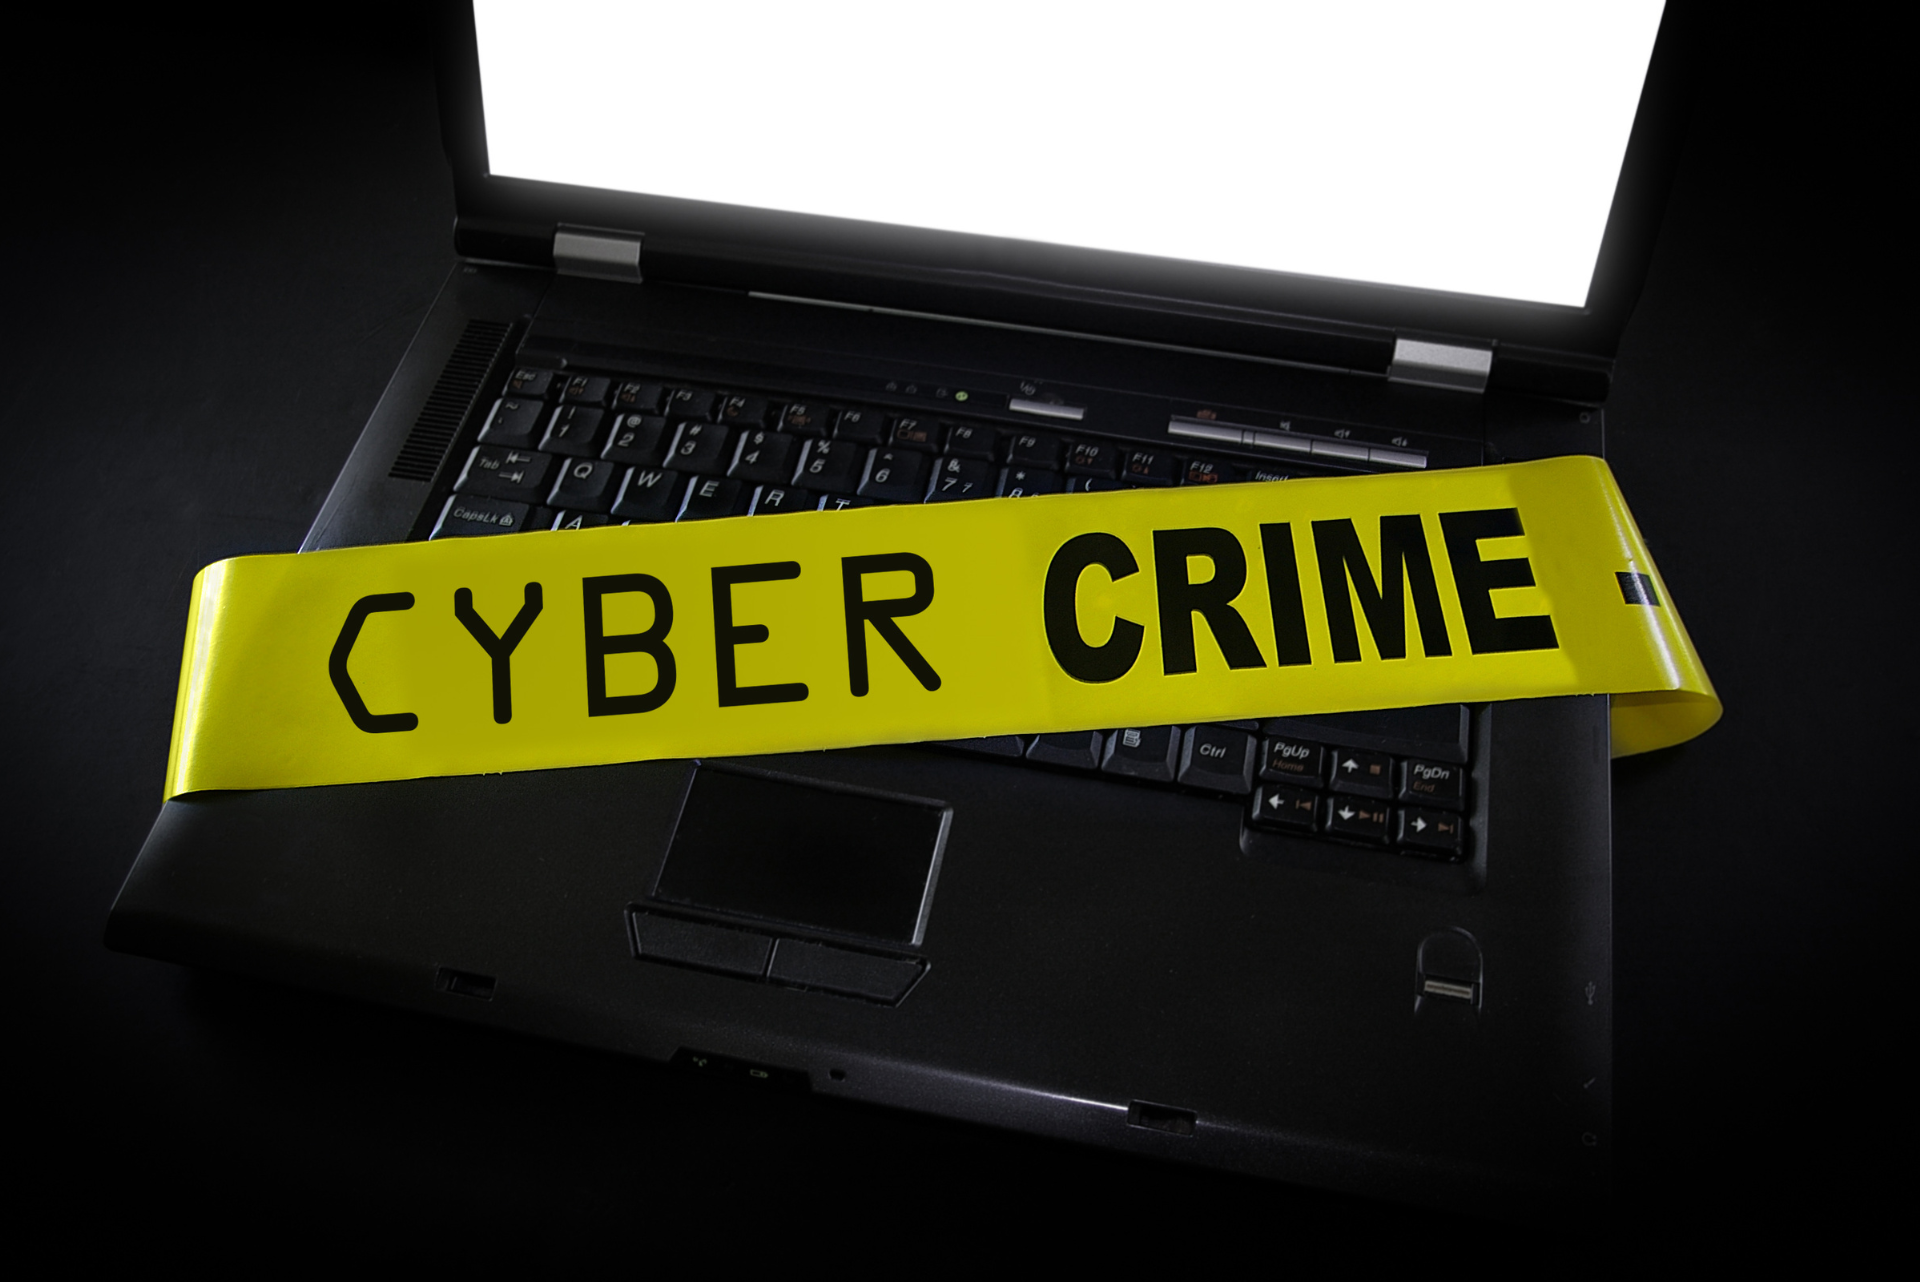 GetMeCoding How to Report Cyber Crime